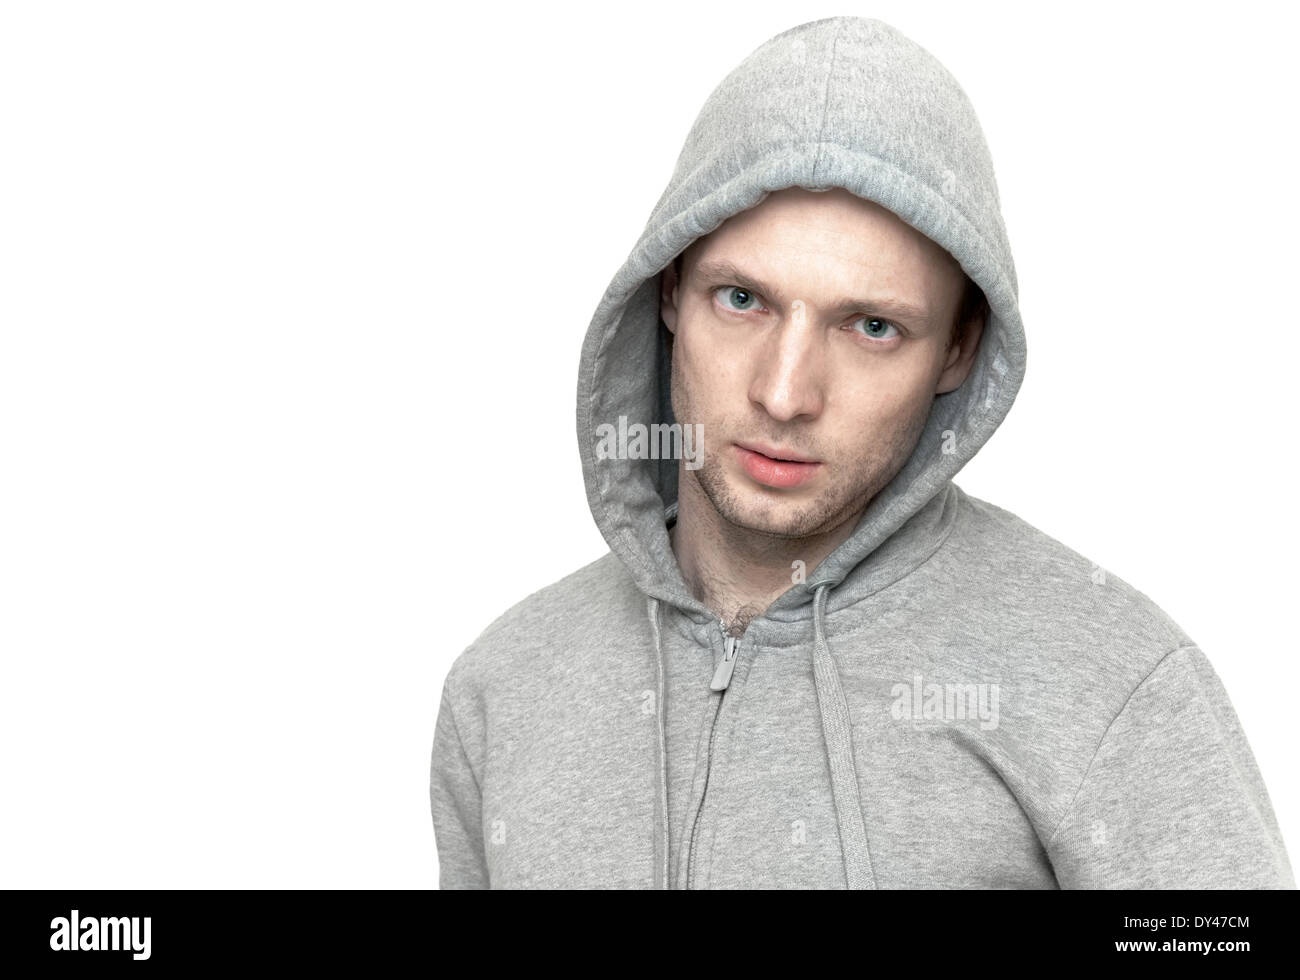 Young Caucasian man in gray jacket with hood. Portrait isolated on white Stock Photo